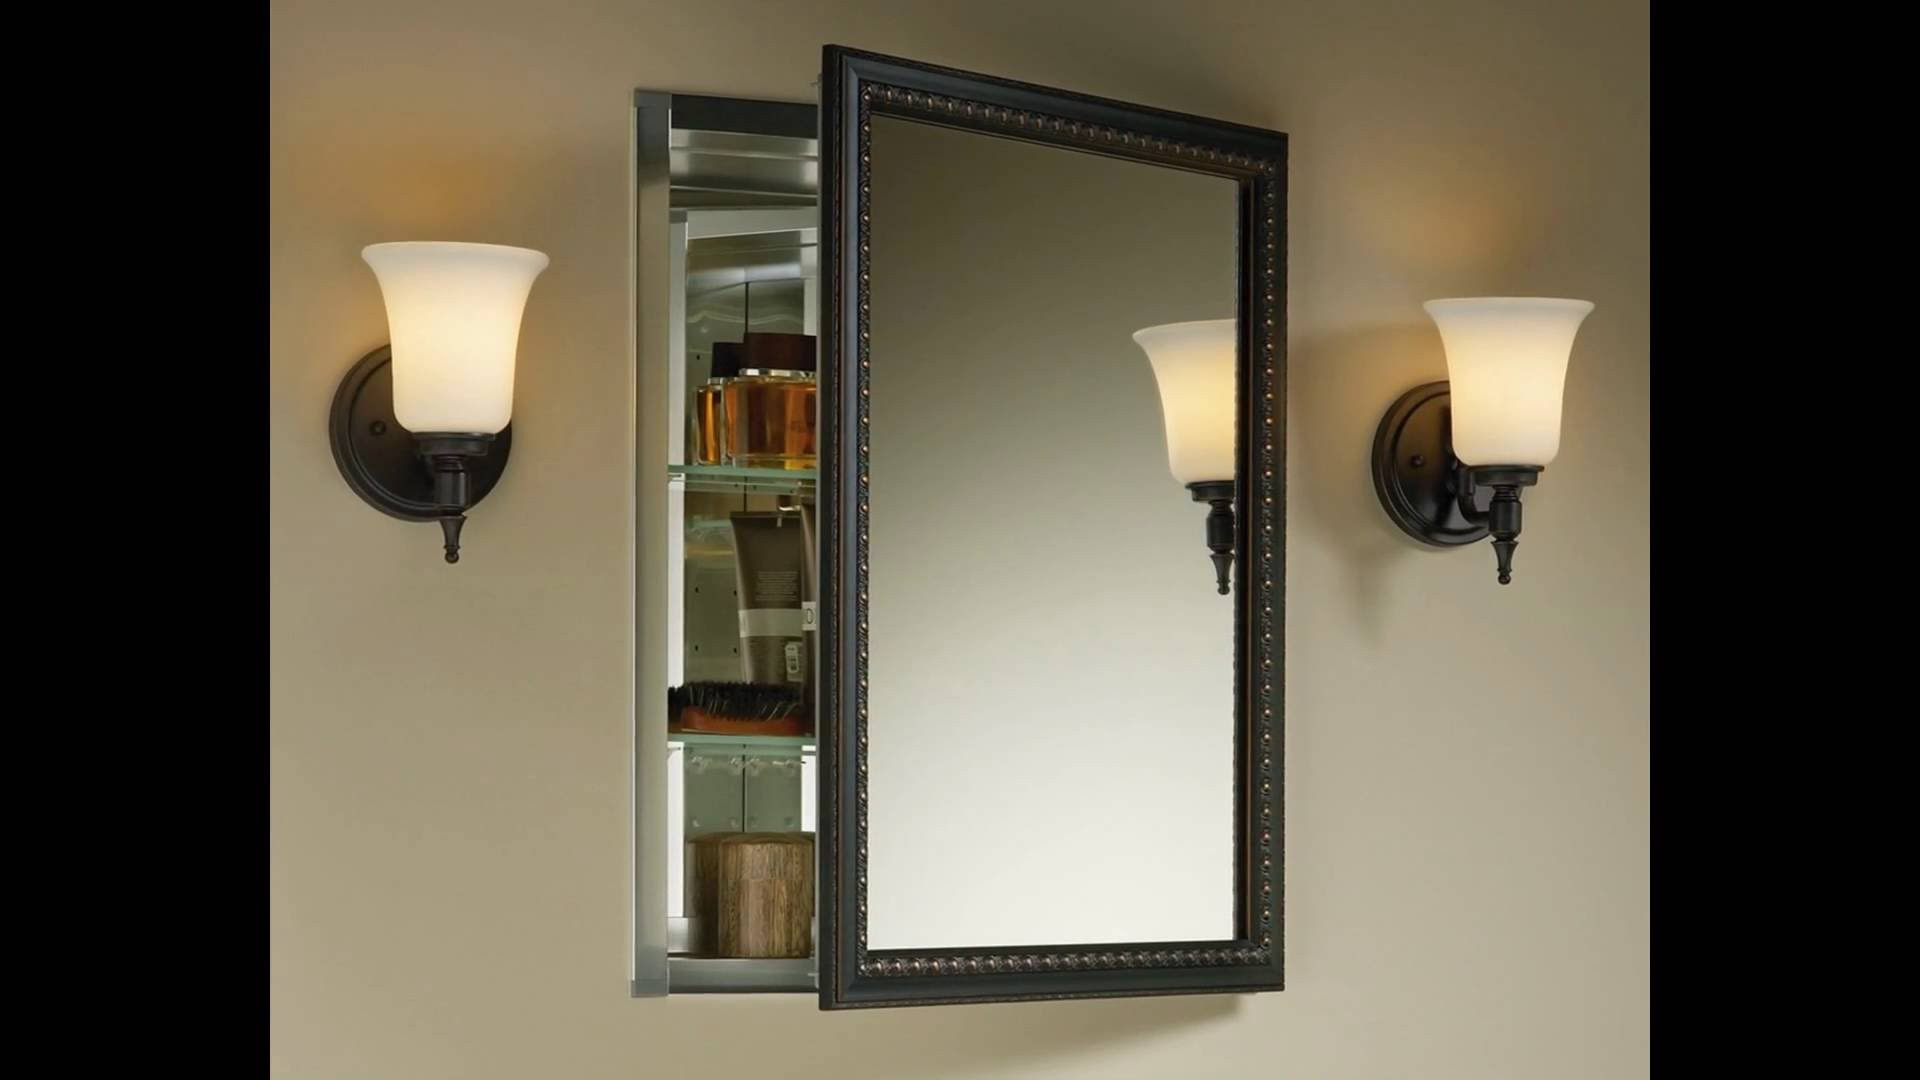 Home Depot Bathroom Mirrors Cabinets
 Furniture Enchanting Design Home Depot Mirrors For